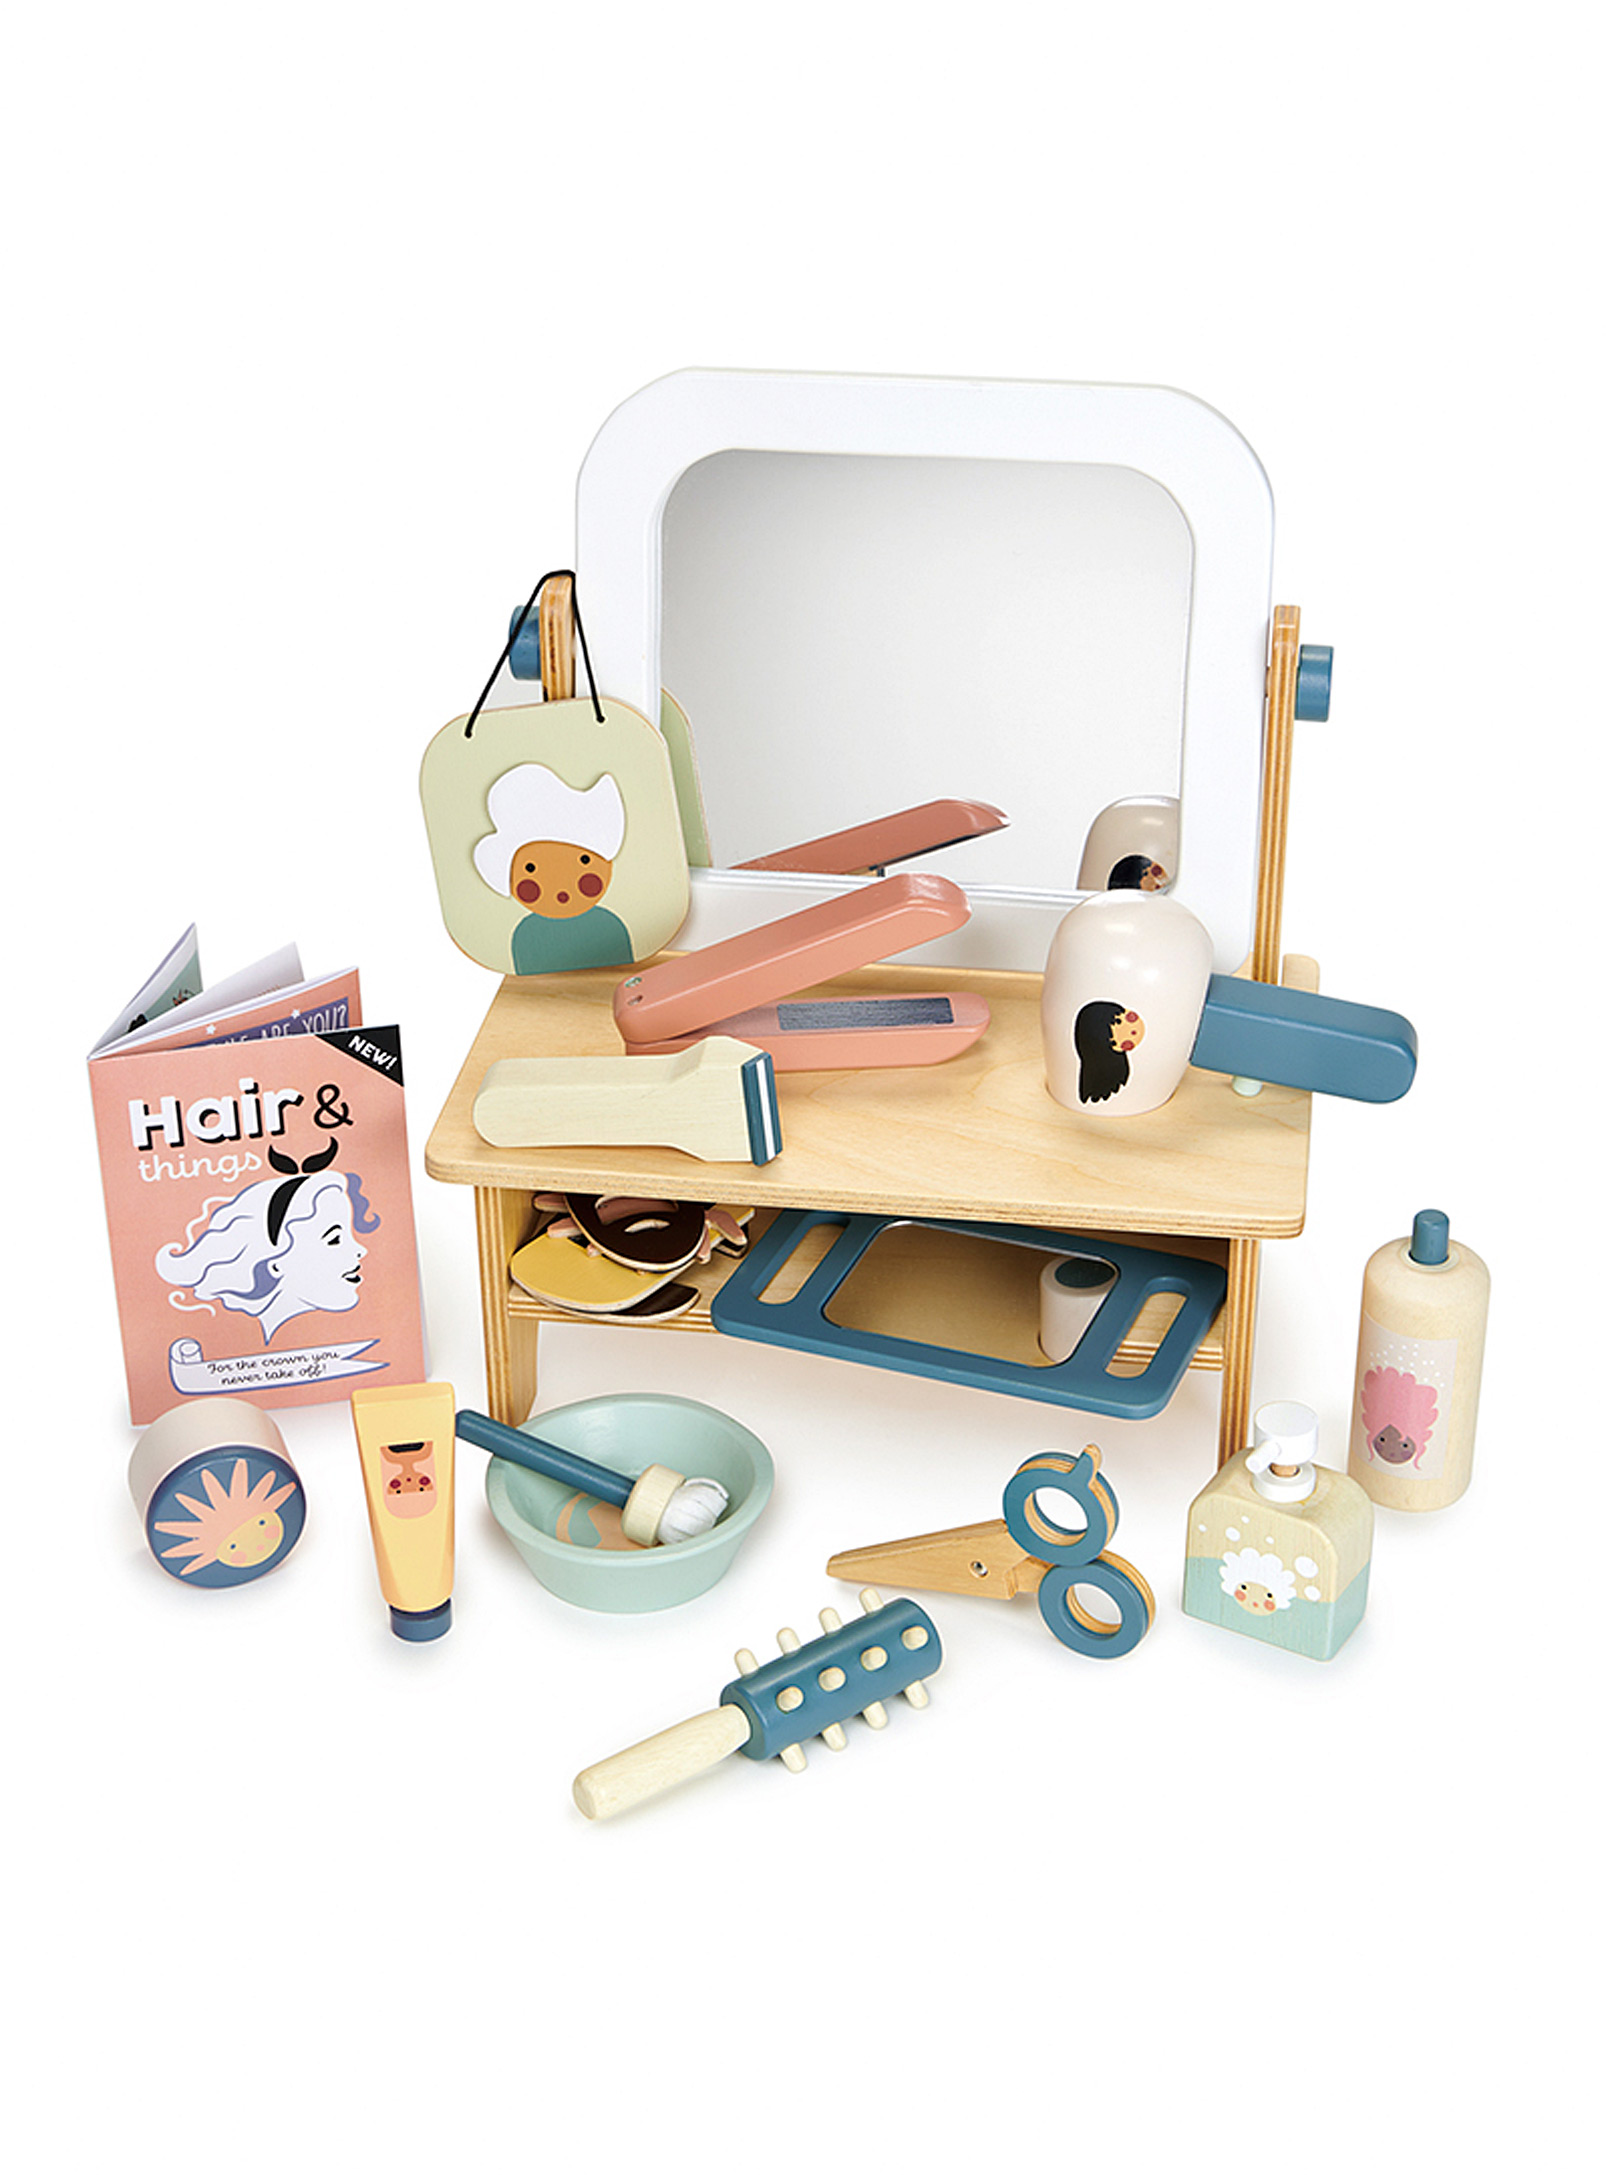 Tender Leaf Toys - Wooden hair salon and accessories 20-piece set